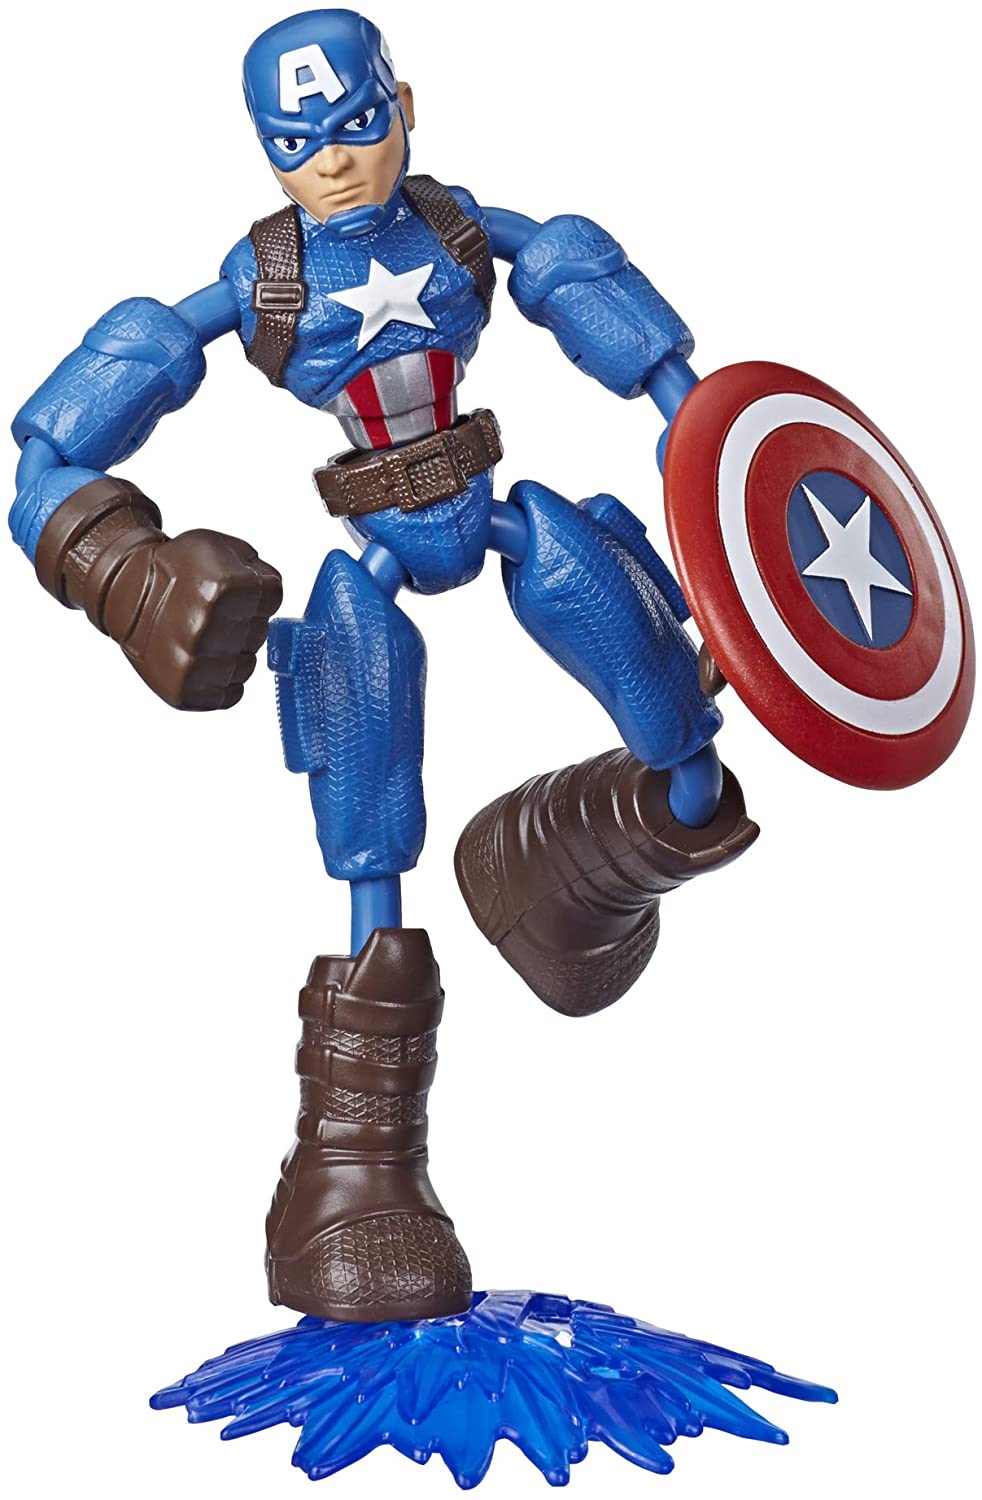 ''Avengers Marvel Bend and Flex ACTION FIGURE Toy, 6-Inch Flexible Captain America FIGURE, Includes B